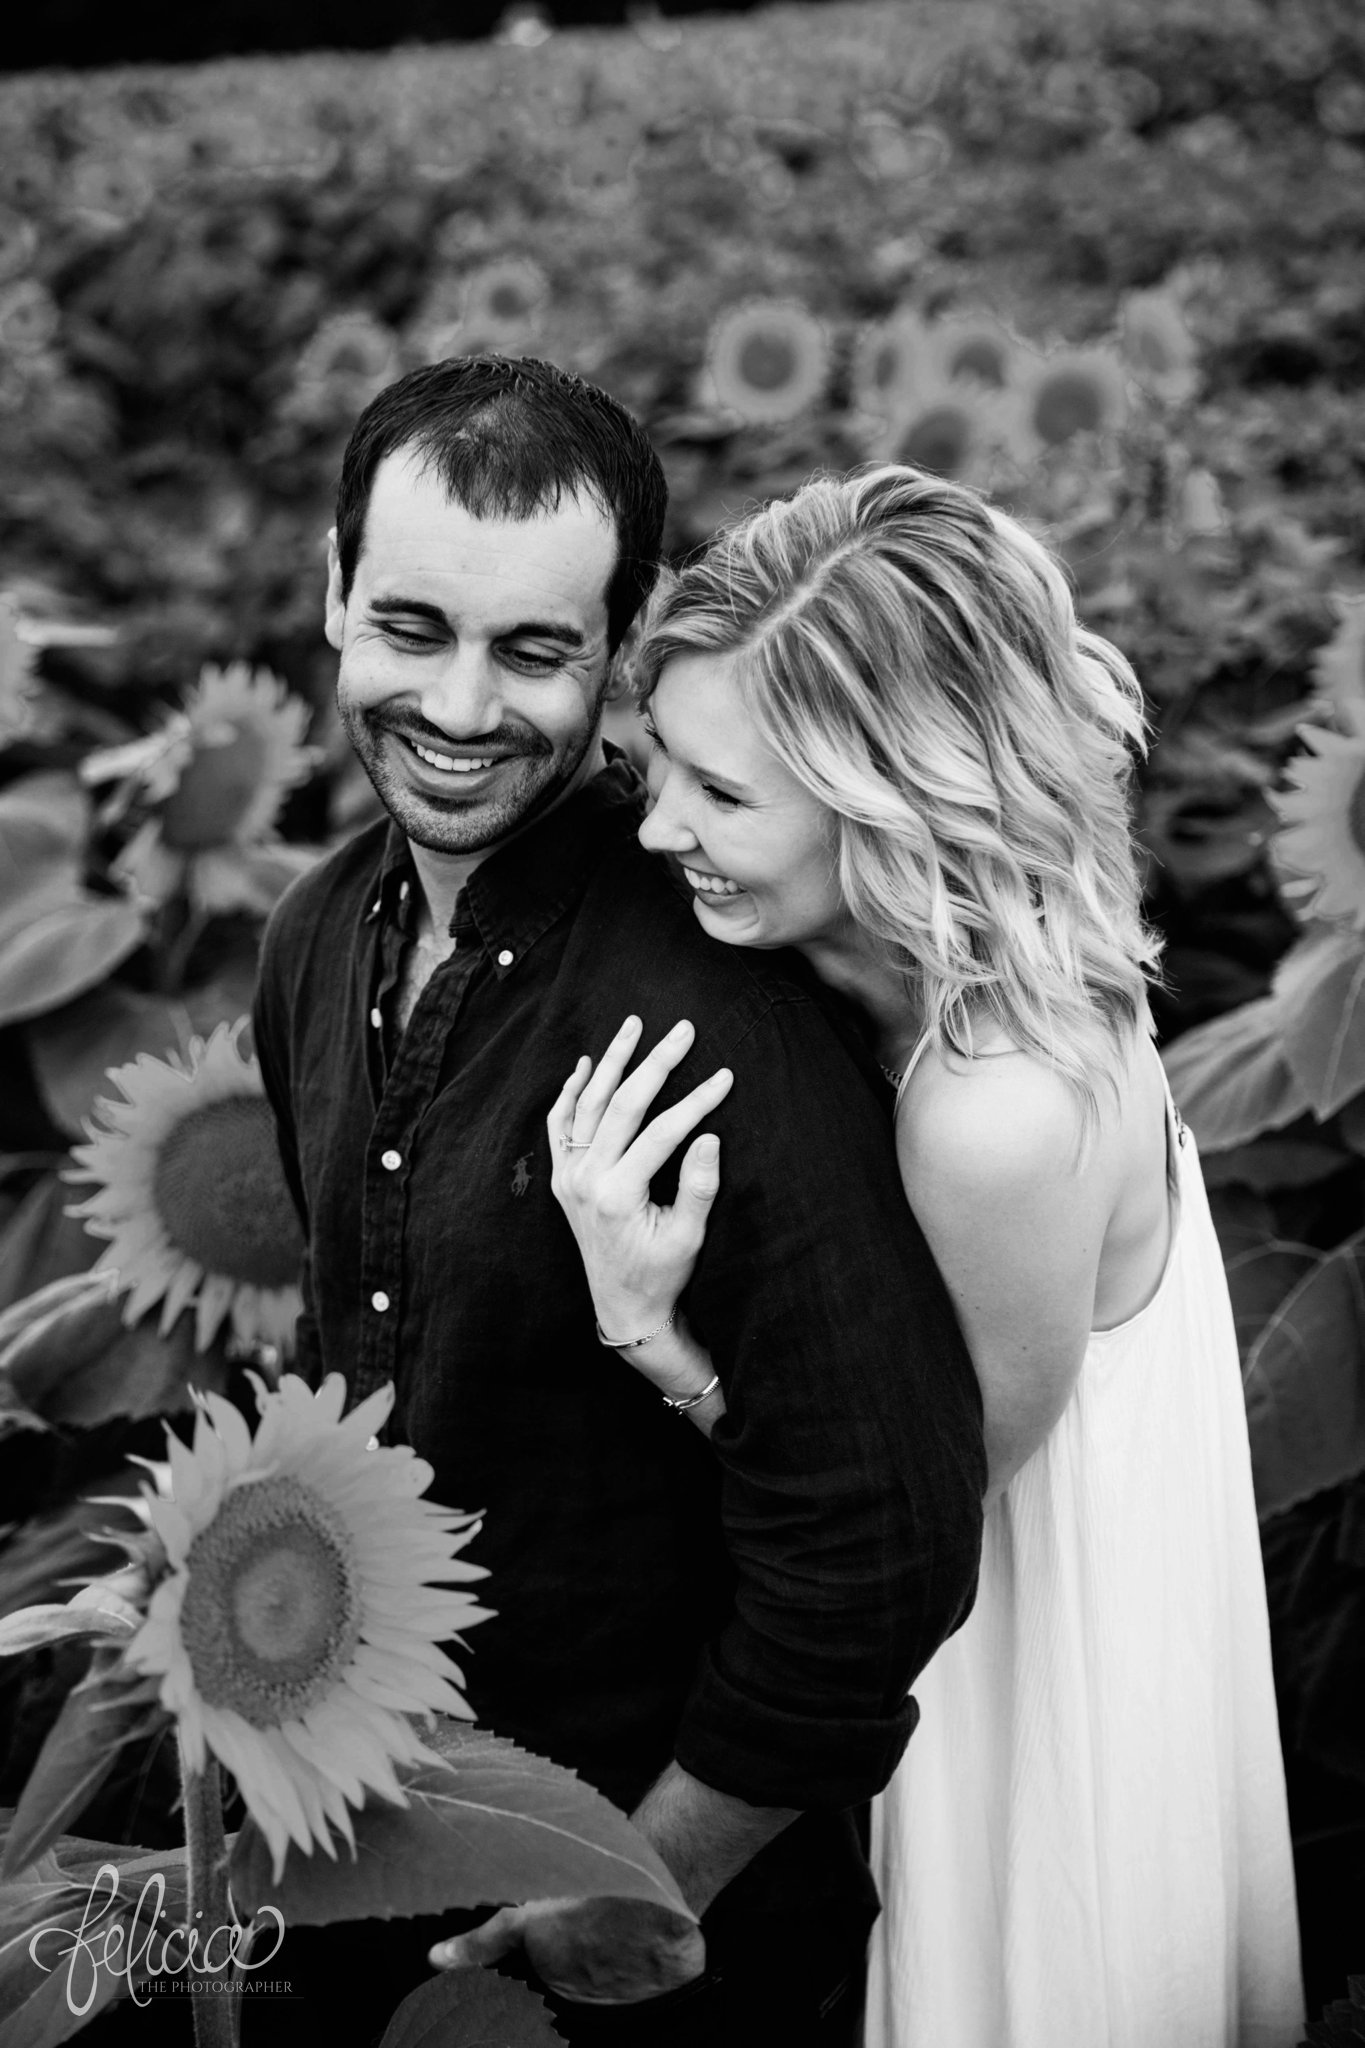 Sunrise Engagement Photos | Felicia The Photographer | Sunflower field | hug from behind | Black and White | Laughing